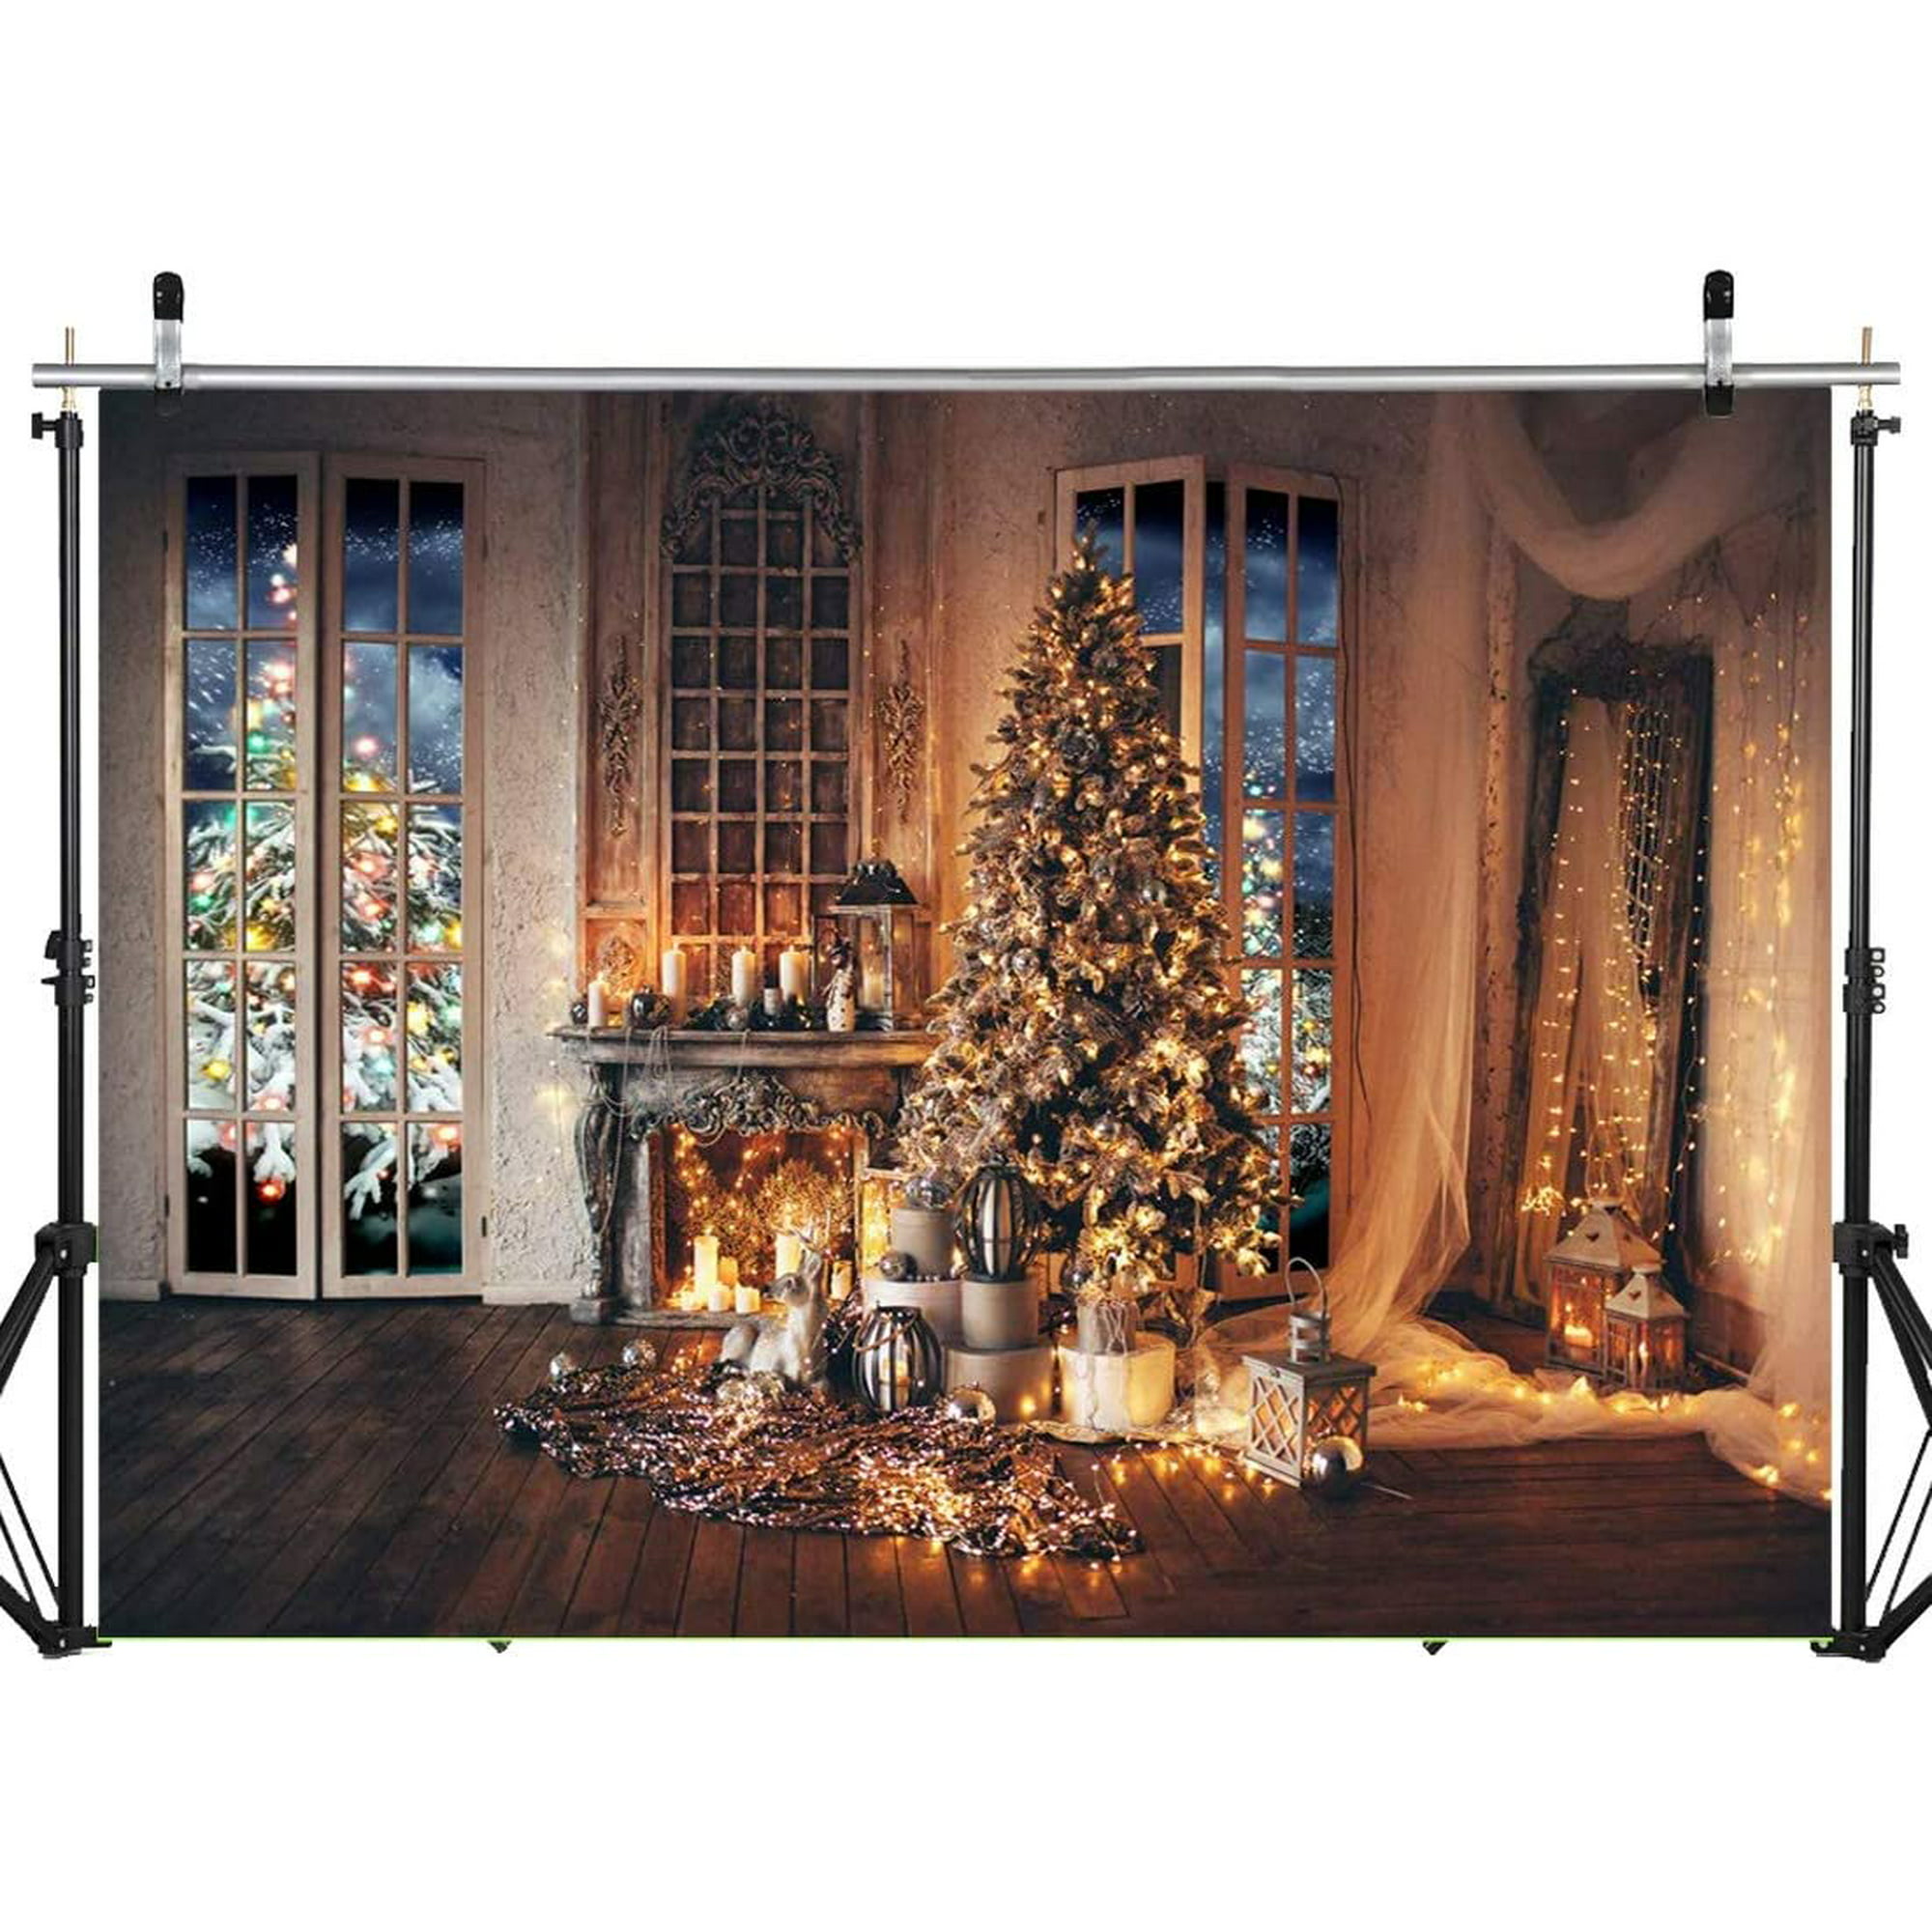 Vinyl 8x6ft Merry Christmas Backdrop Photography Background Christmas Tree Decorations Christmas Decorations Indoor Fireplace Festival Party Backdrop Studio Props 